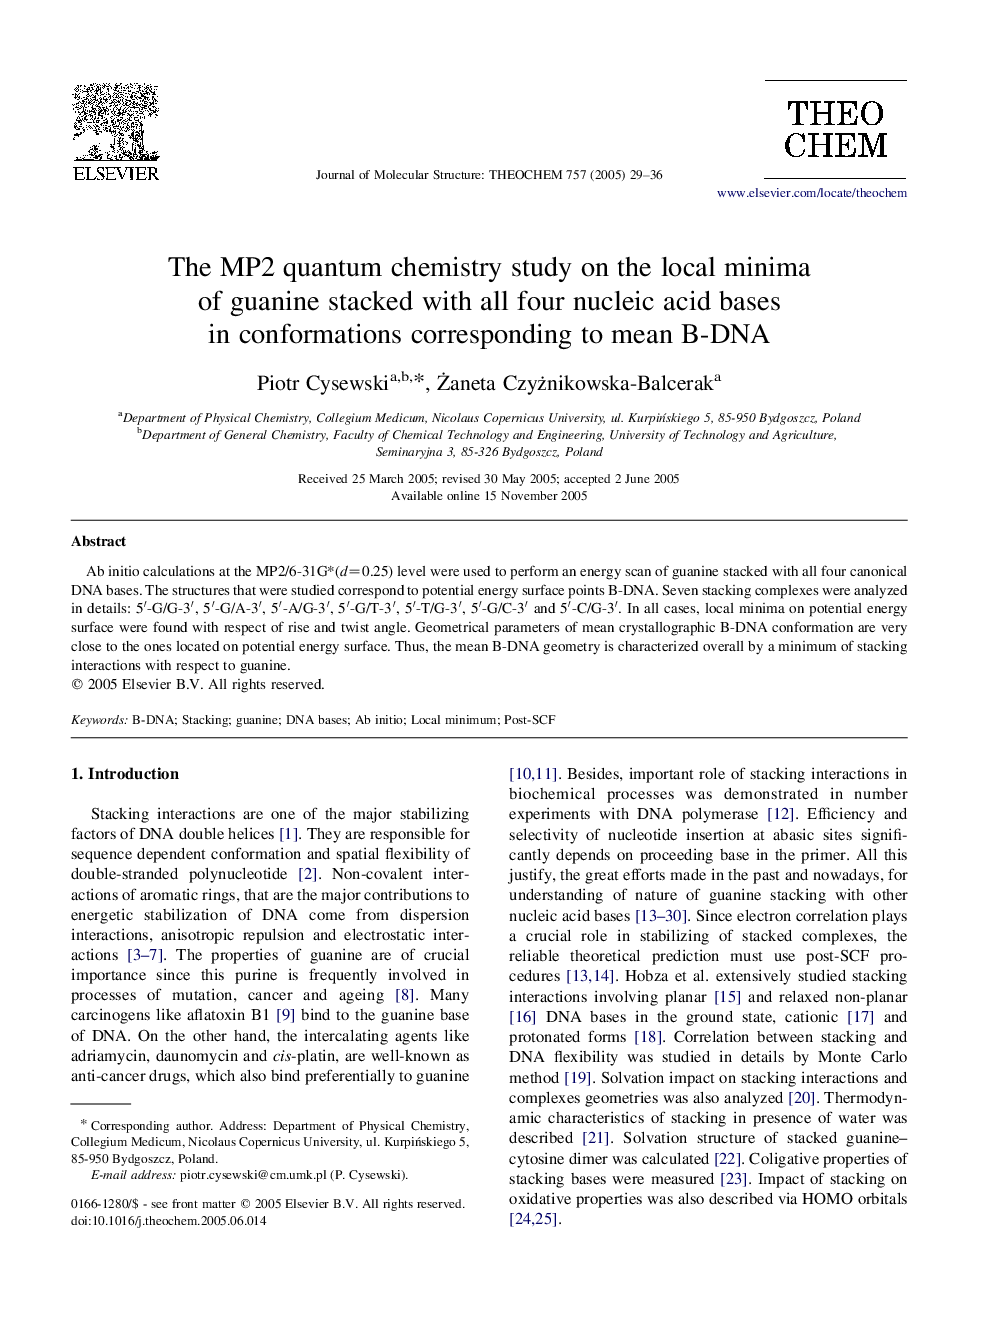 The MP2 quantum chemistry study on the local minima of guanine stacked with all four nucleic acid bases in conformations corresponding to mean B-DNA